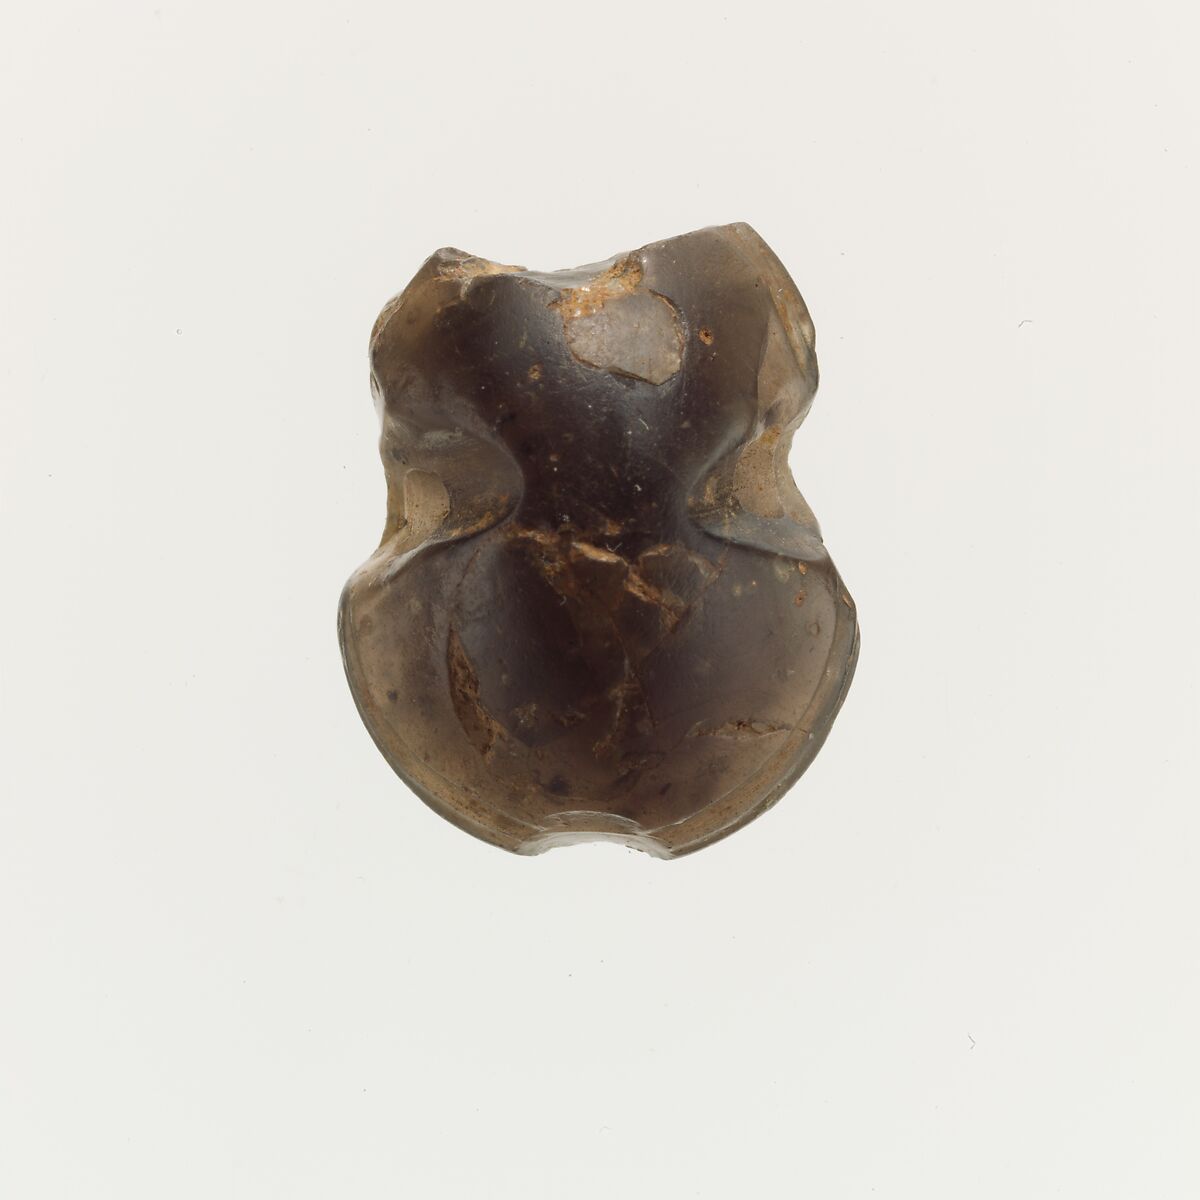 Obsidian bead in the form of of a figure-of-eight shield, Obsidian, Minoan 